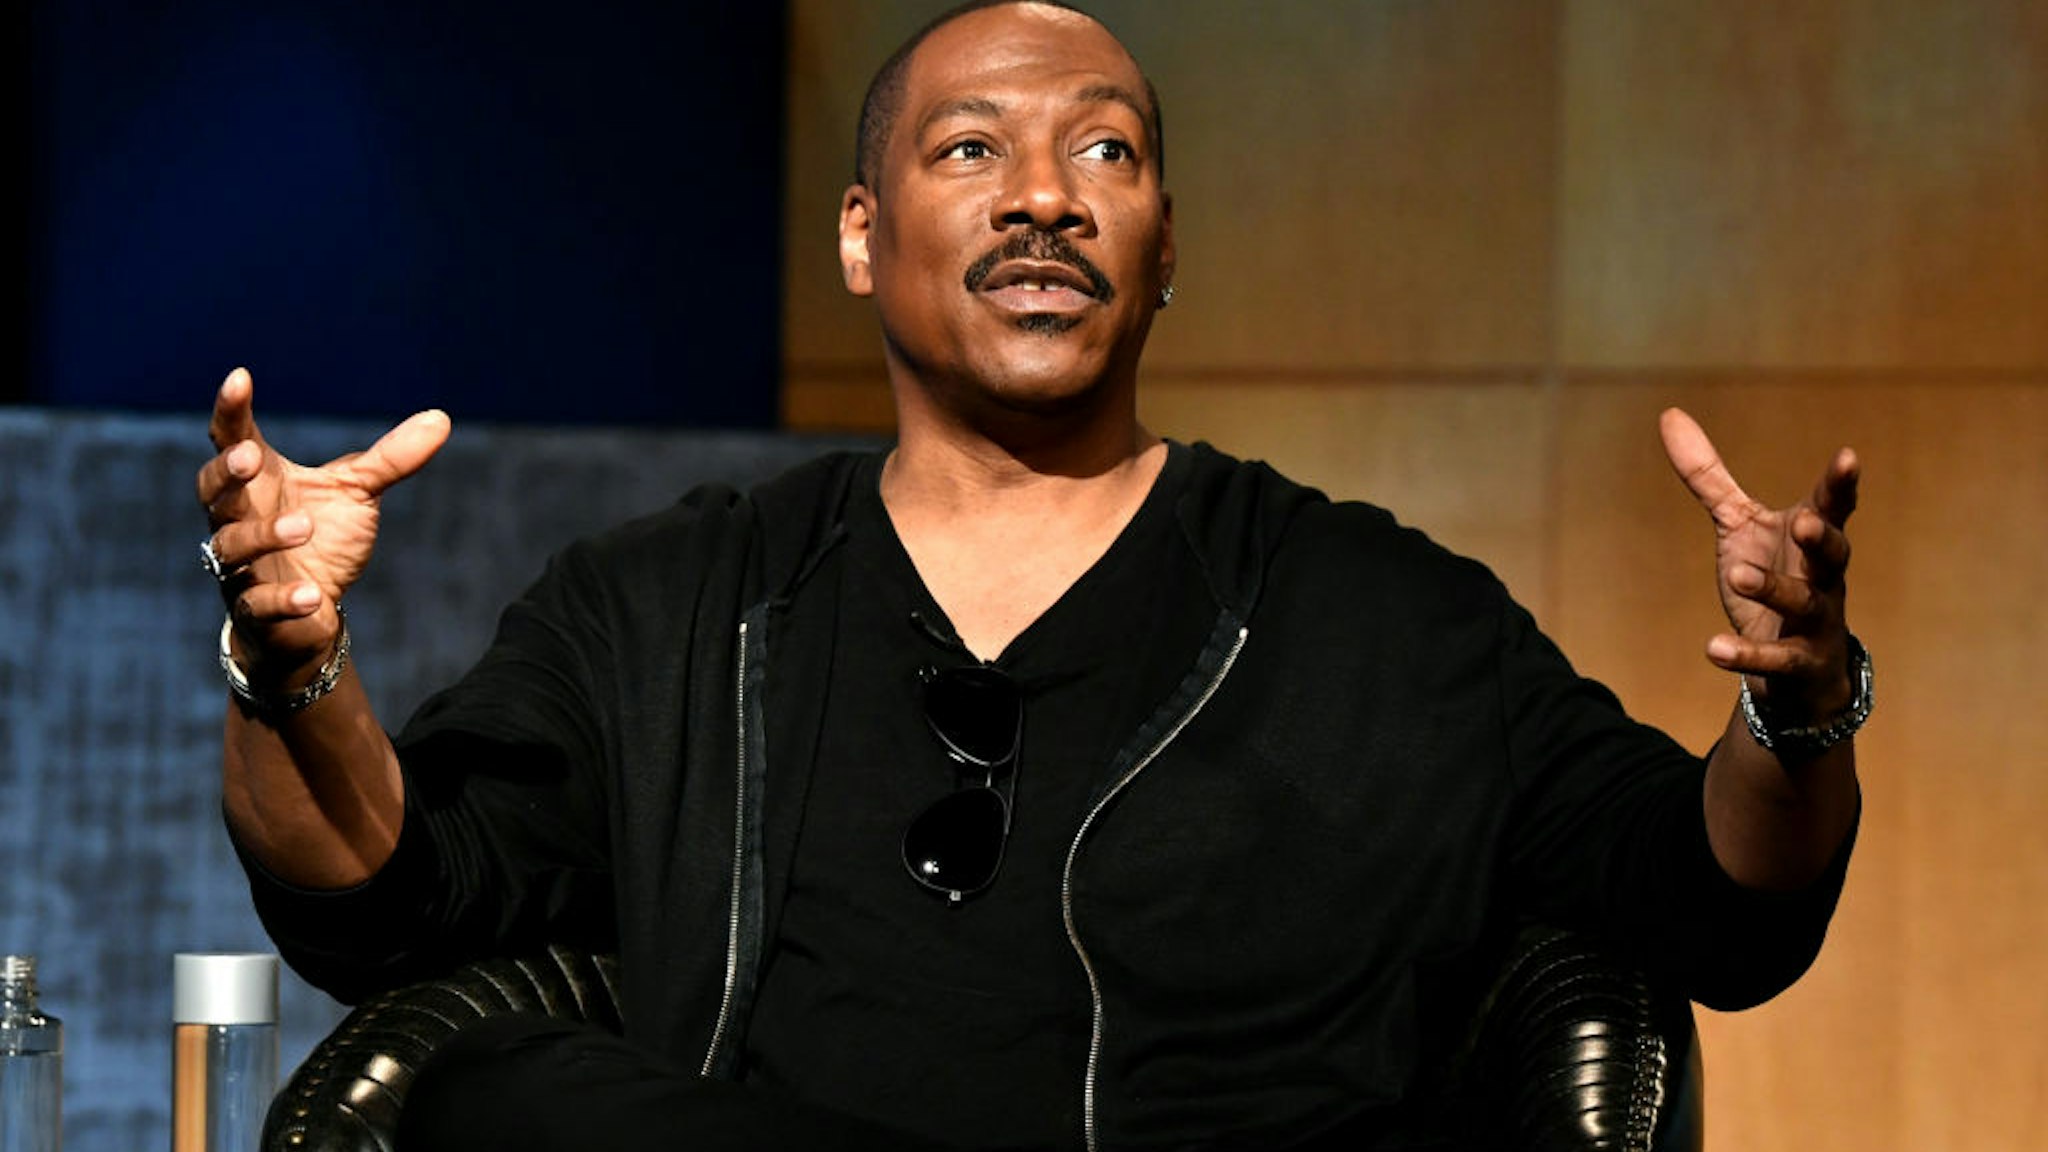 Eddie Murphy speaks onstage during the LA Tastemaker event for Comedians in Cars at The Paley Center for Media on July 17, 2019 in Beverly Hills City.